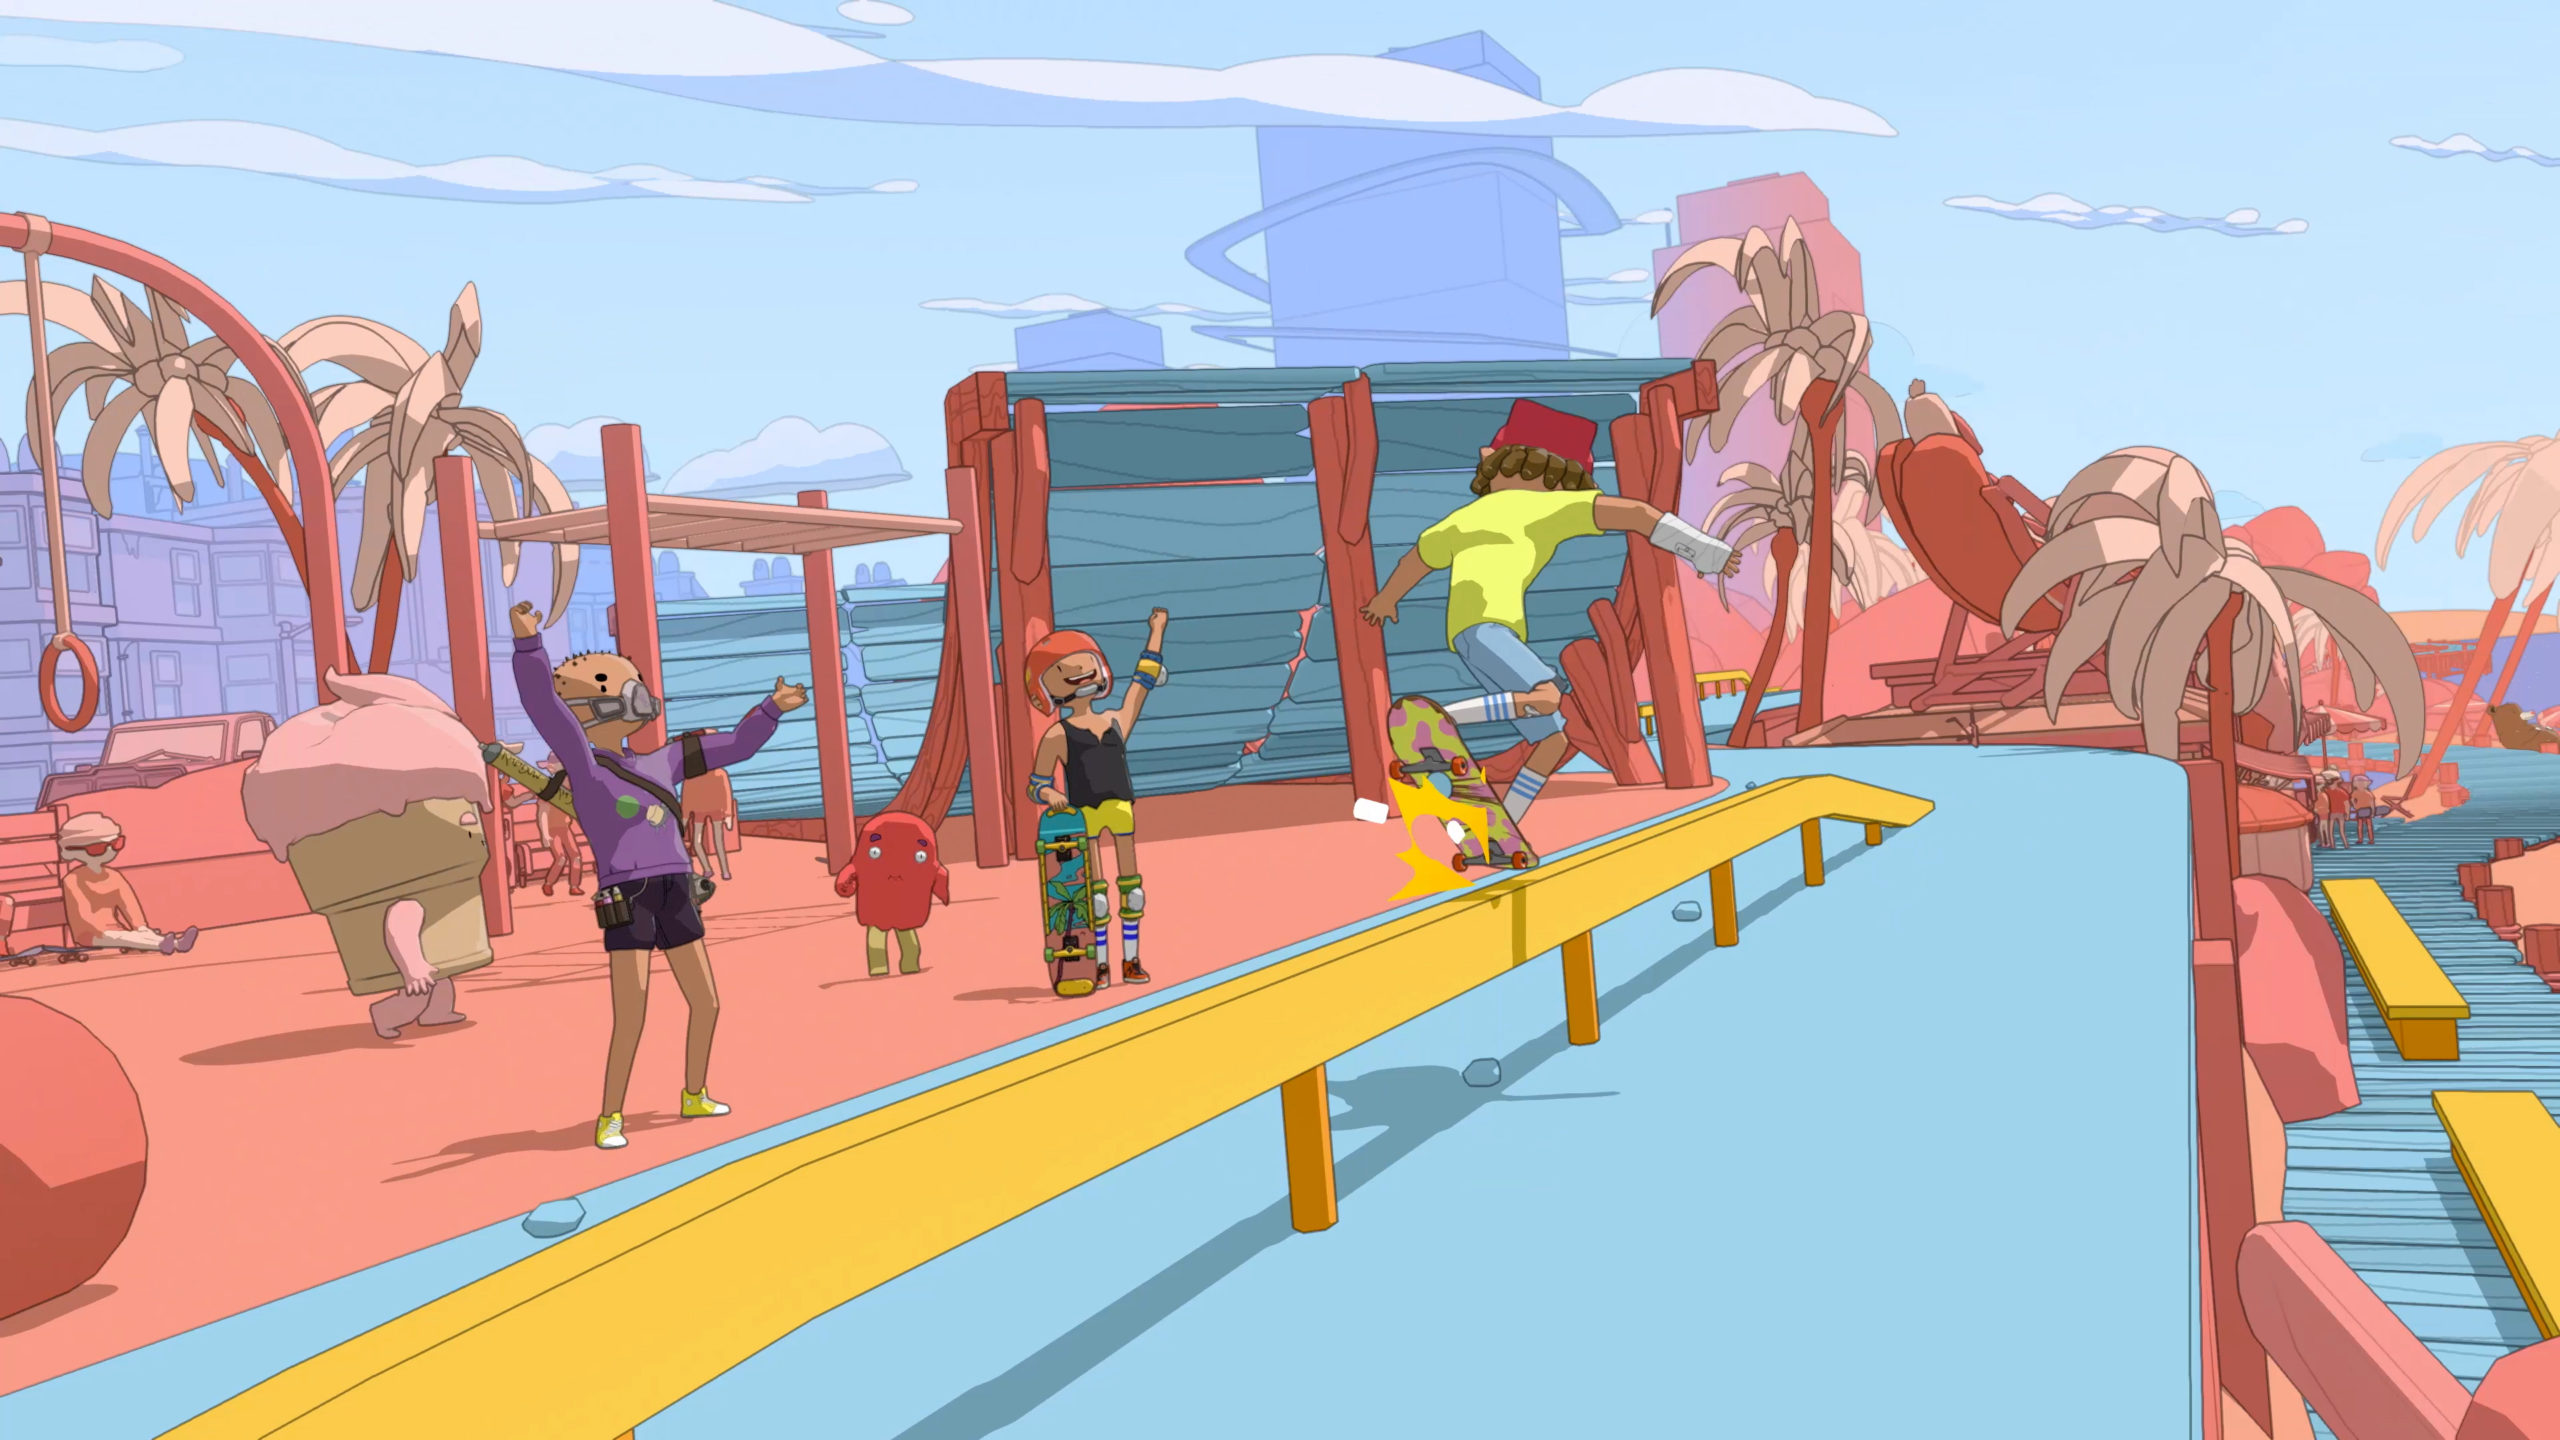 The player doing a grind on a rail while passerbys cheer